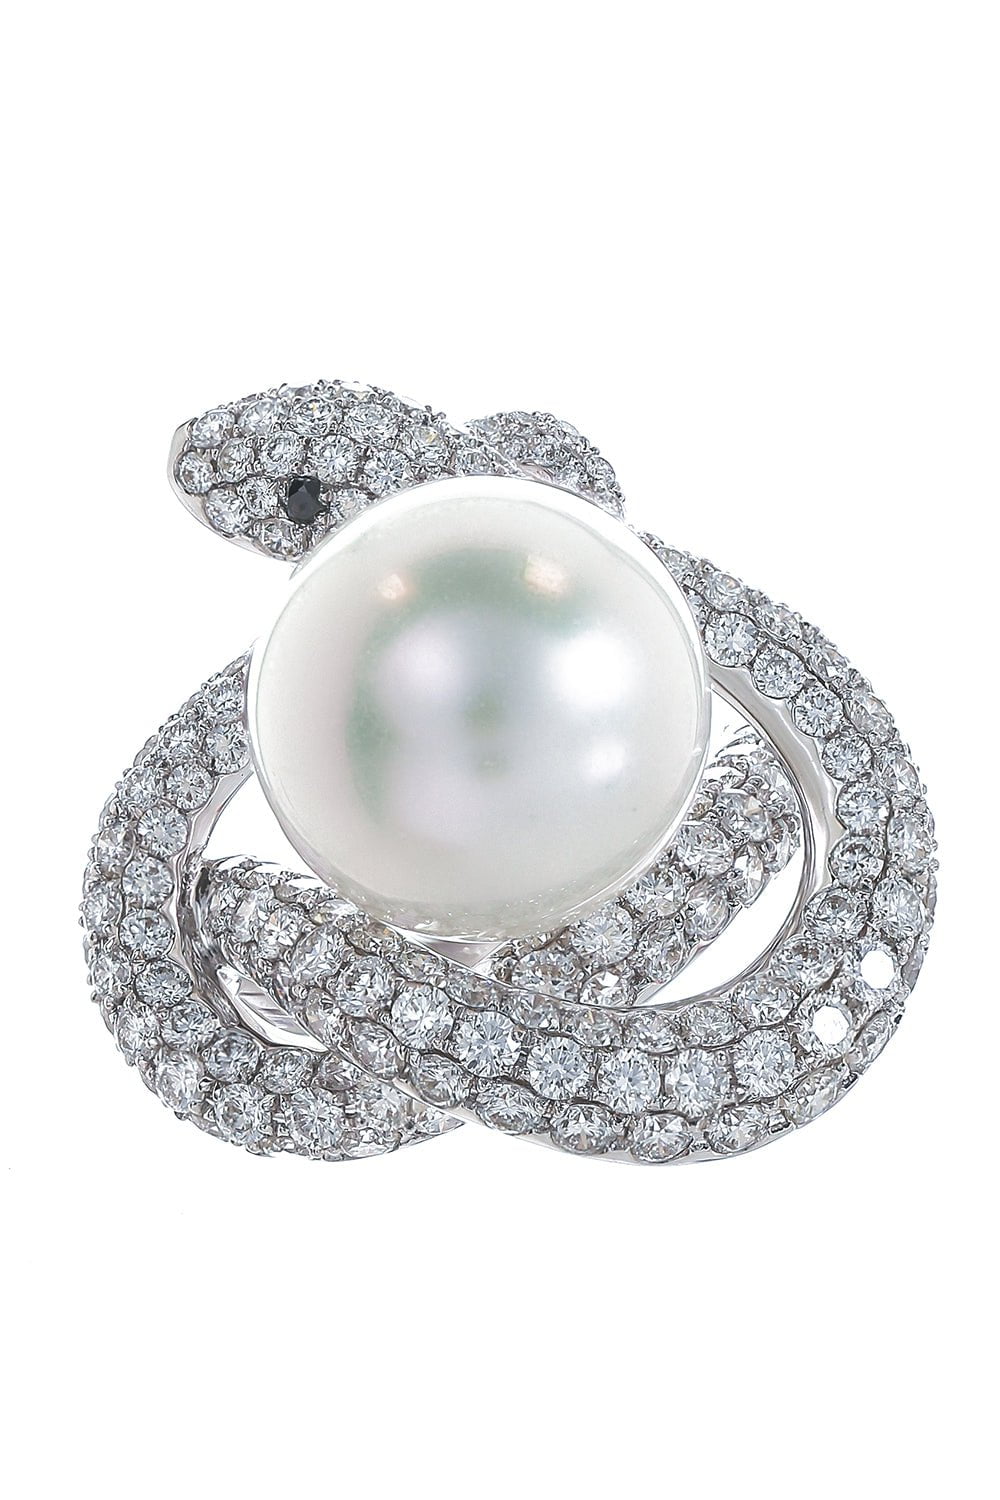 STEFERE-South Sea Pearl Diamond Snake Ring-WHITE GOLD